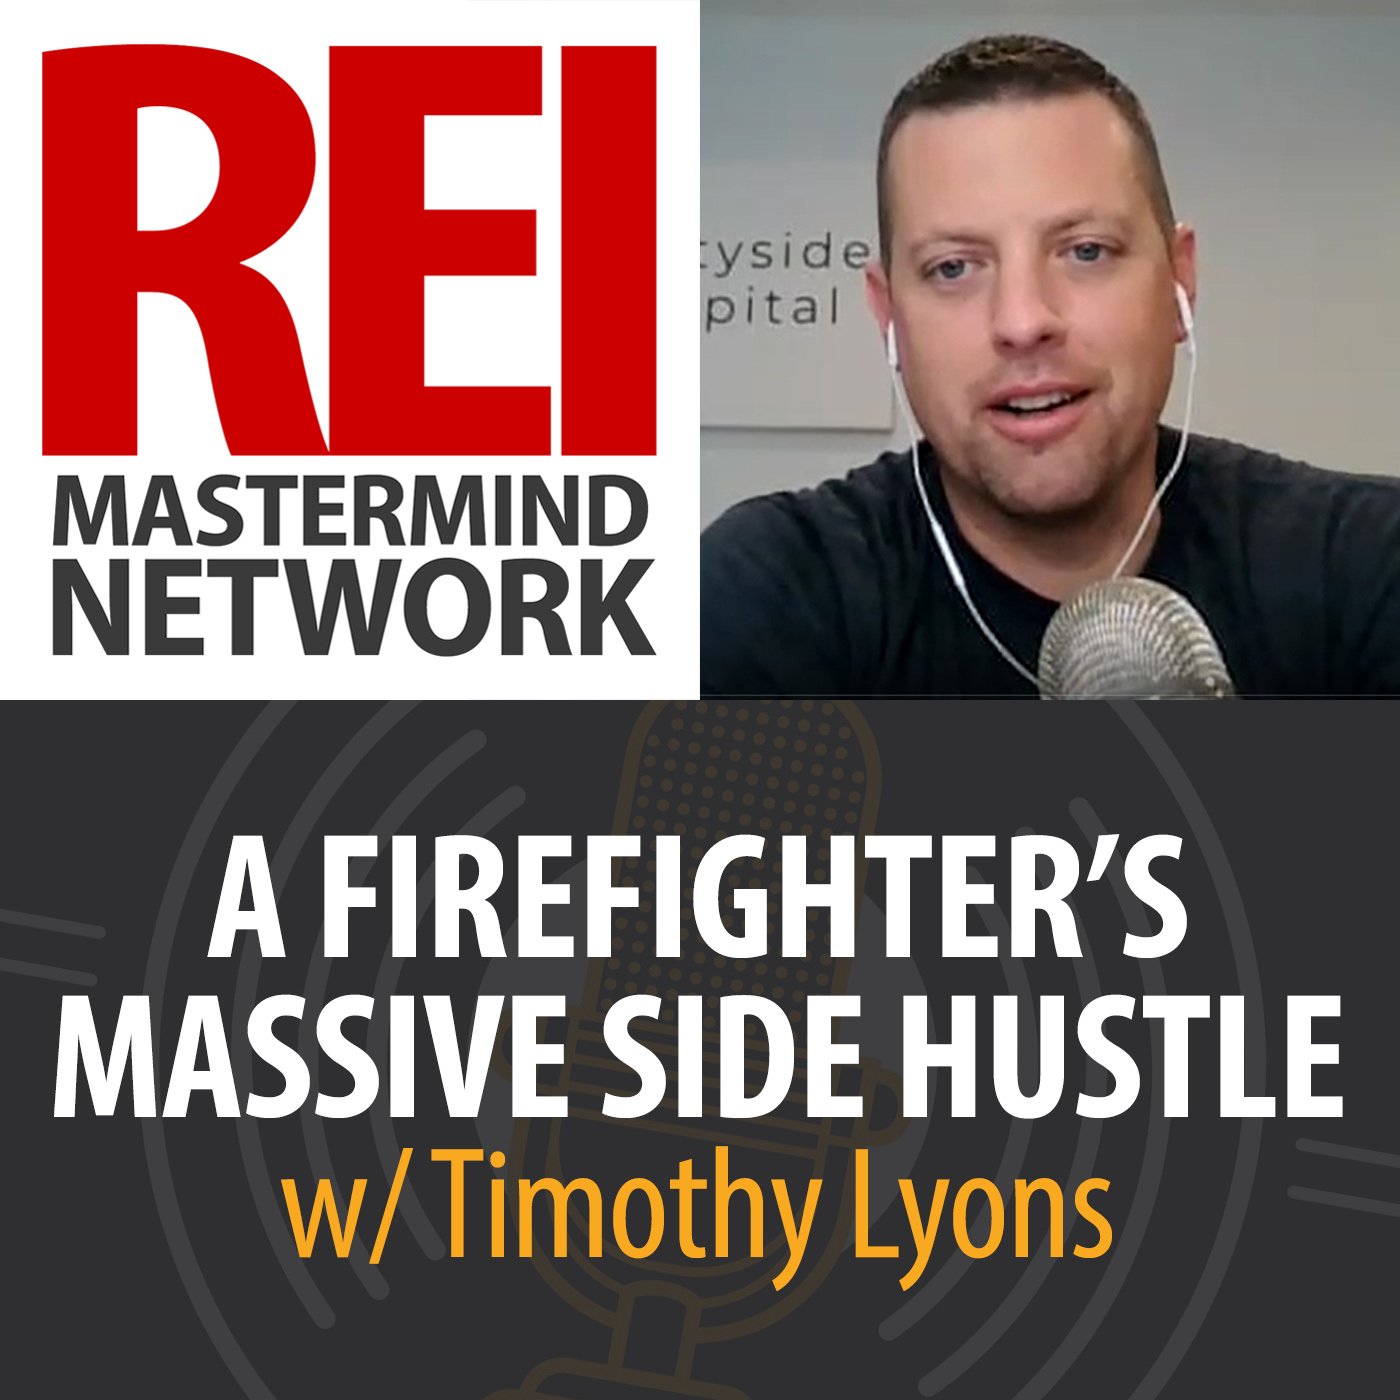 A Firefighter's Massive Side Hussle with Timothy Lyons